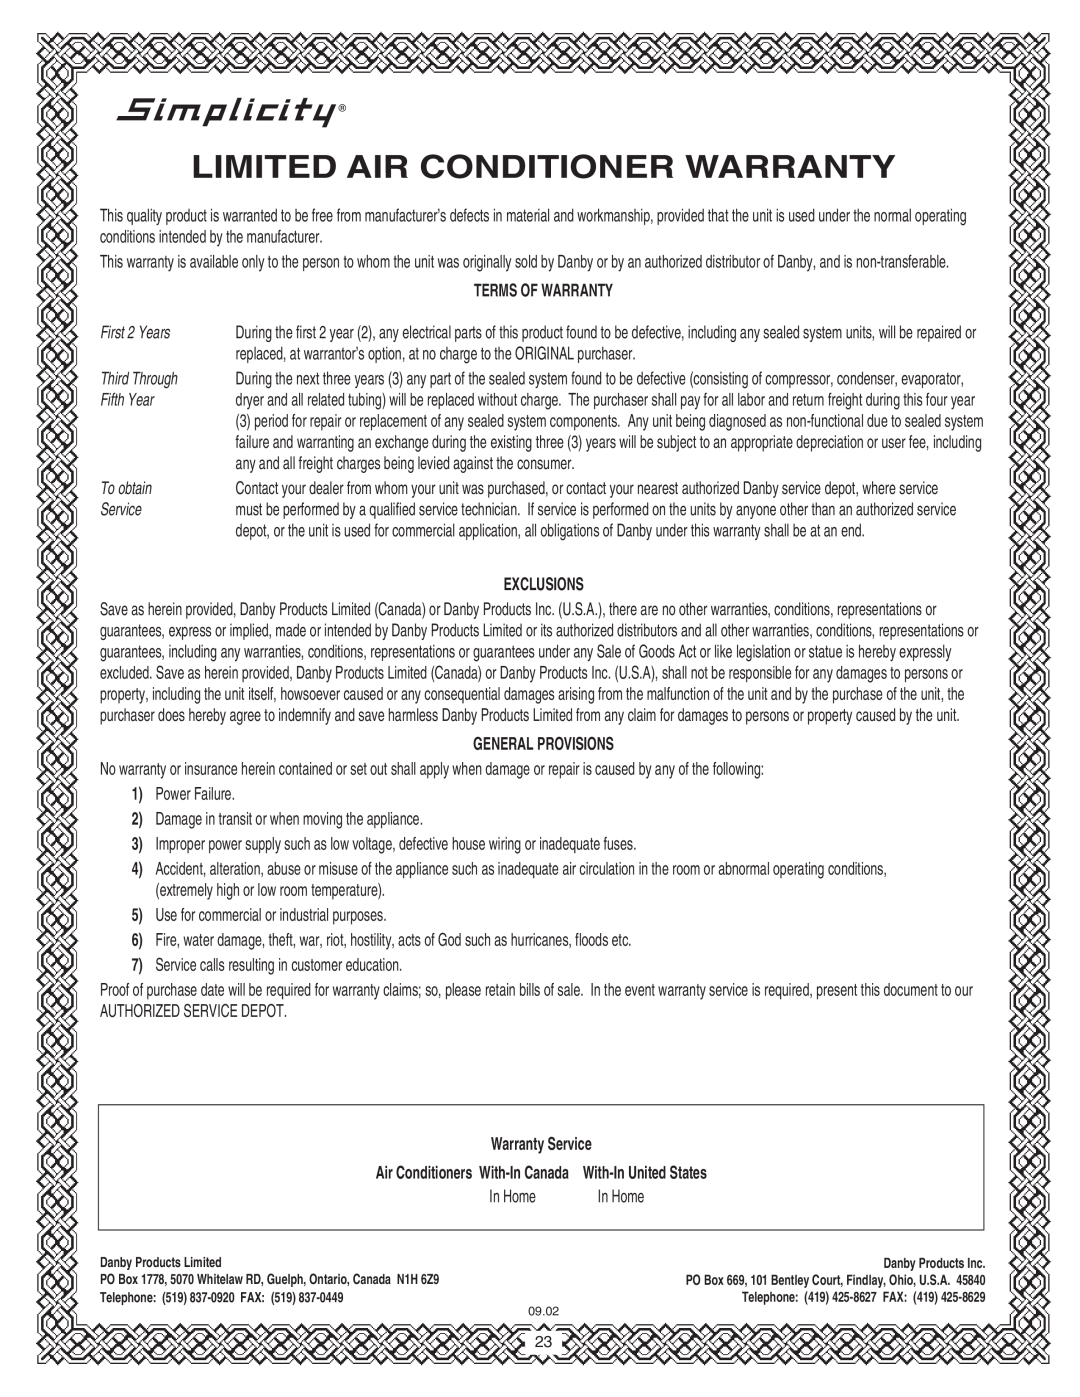 Danby SPAC8499 Limited Air Conditioner Warranty, Terms Of Warranty, First 2 Years, Third Through, Fifth Year, To obtain 